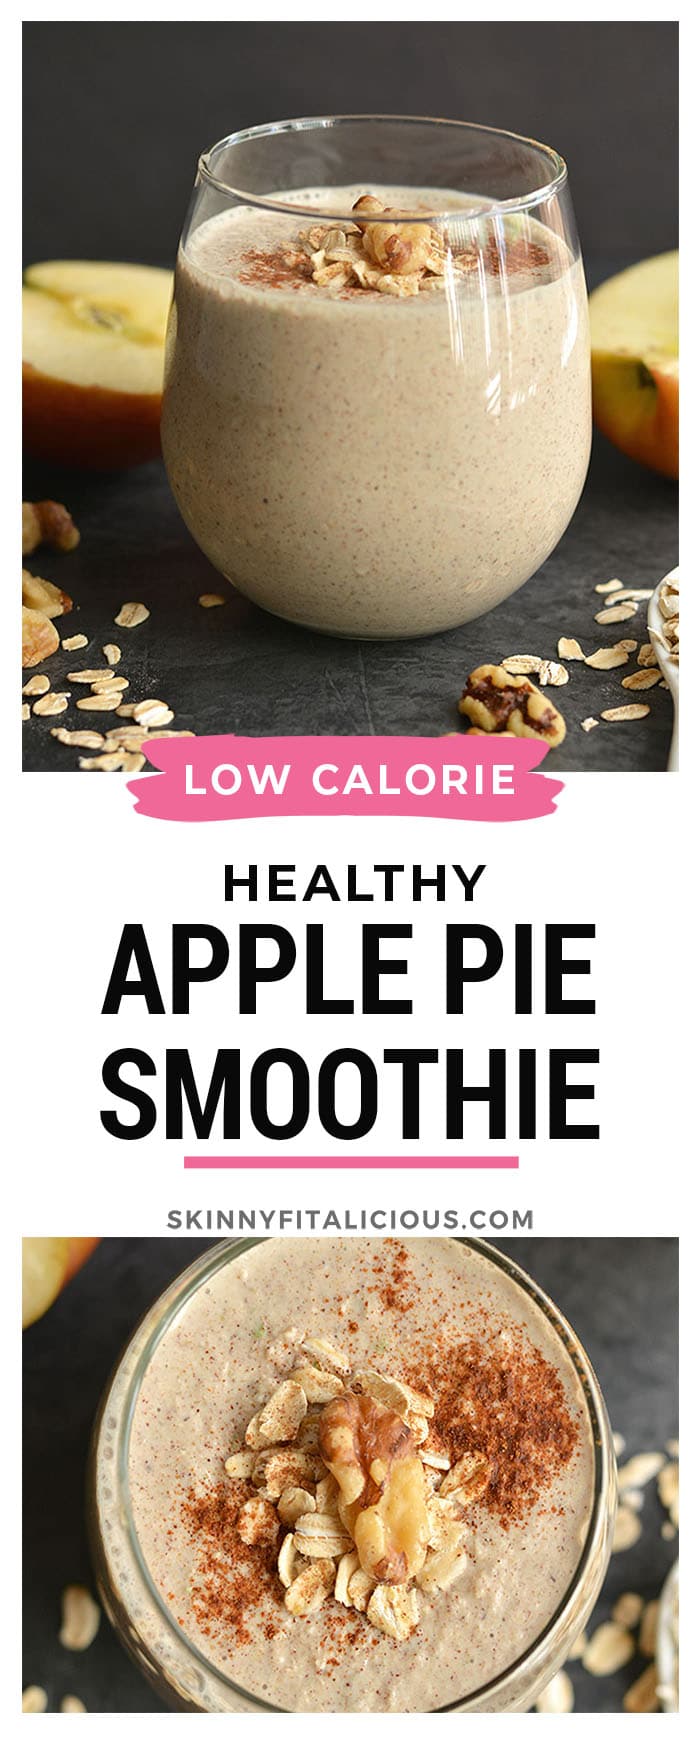 Toasted Walnut Apple Pie Smoothie! A healthy dessert like overnight oatmeal smoothie you can enjoy for breakfast, post workout, or anytime a sweet craving hits! Super creamy, packed with protein and fiber. Gluten free + Low Calorie